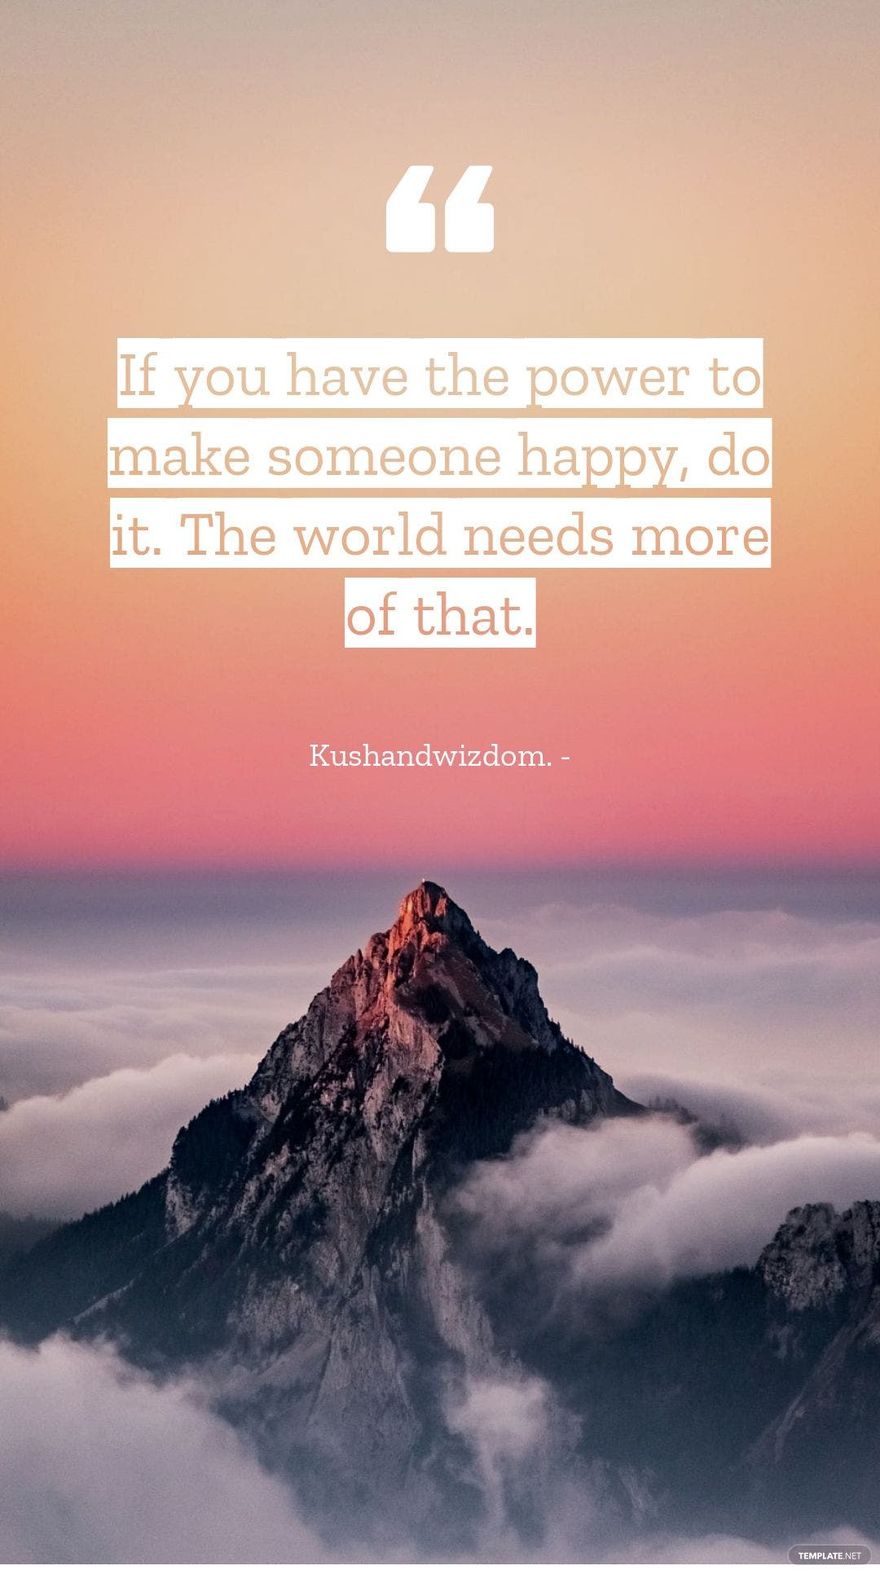 Kushandwizdom. - If you have the power to make someone happy, do it. The world needs more of that.